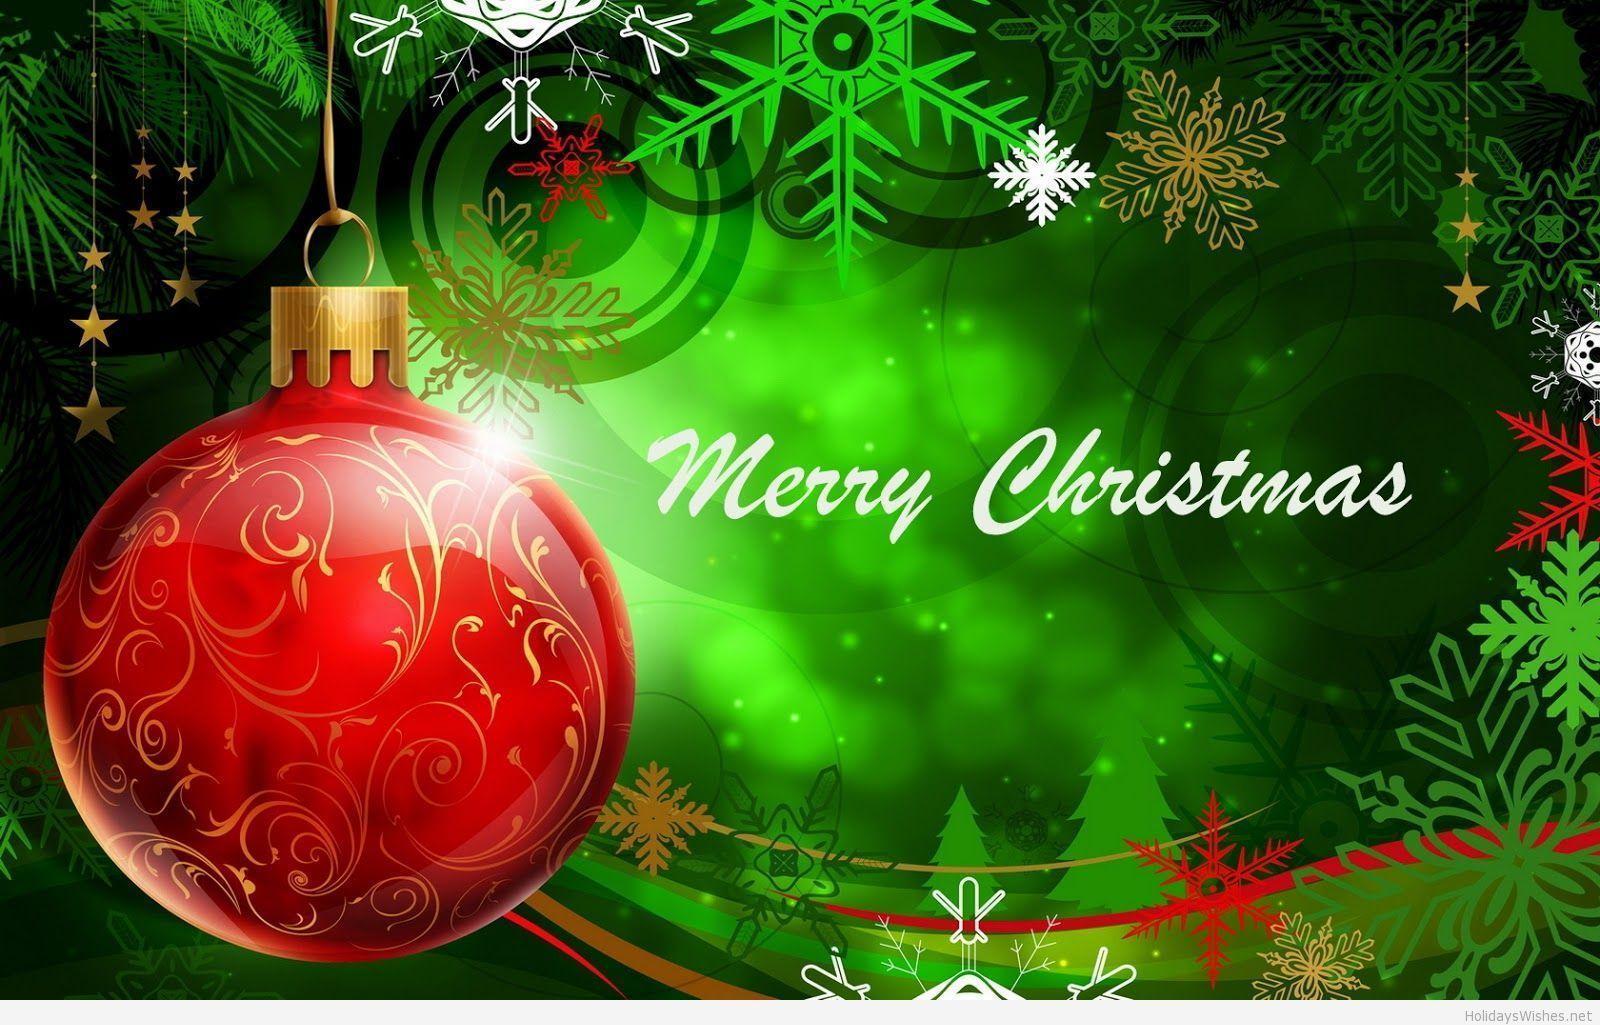 Merry Christmas Wallpapers 2015 - Wallpaper Cave